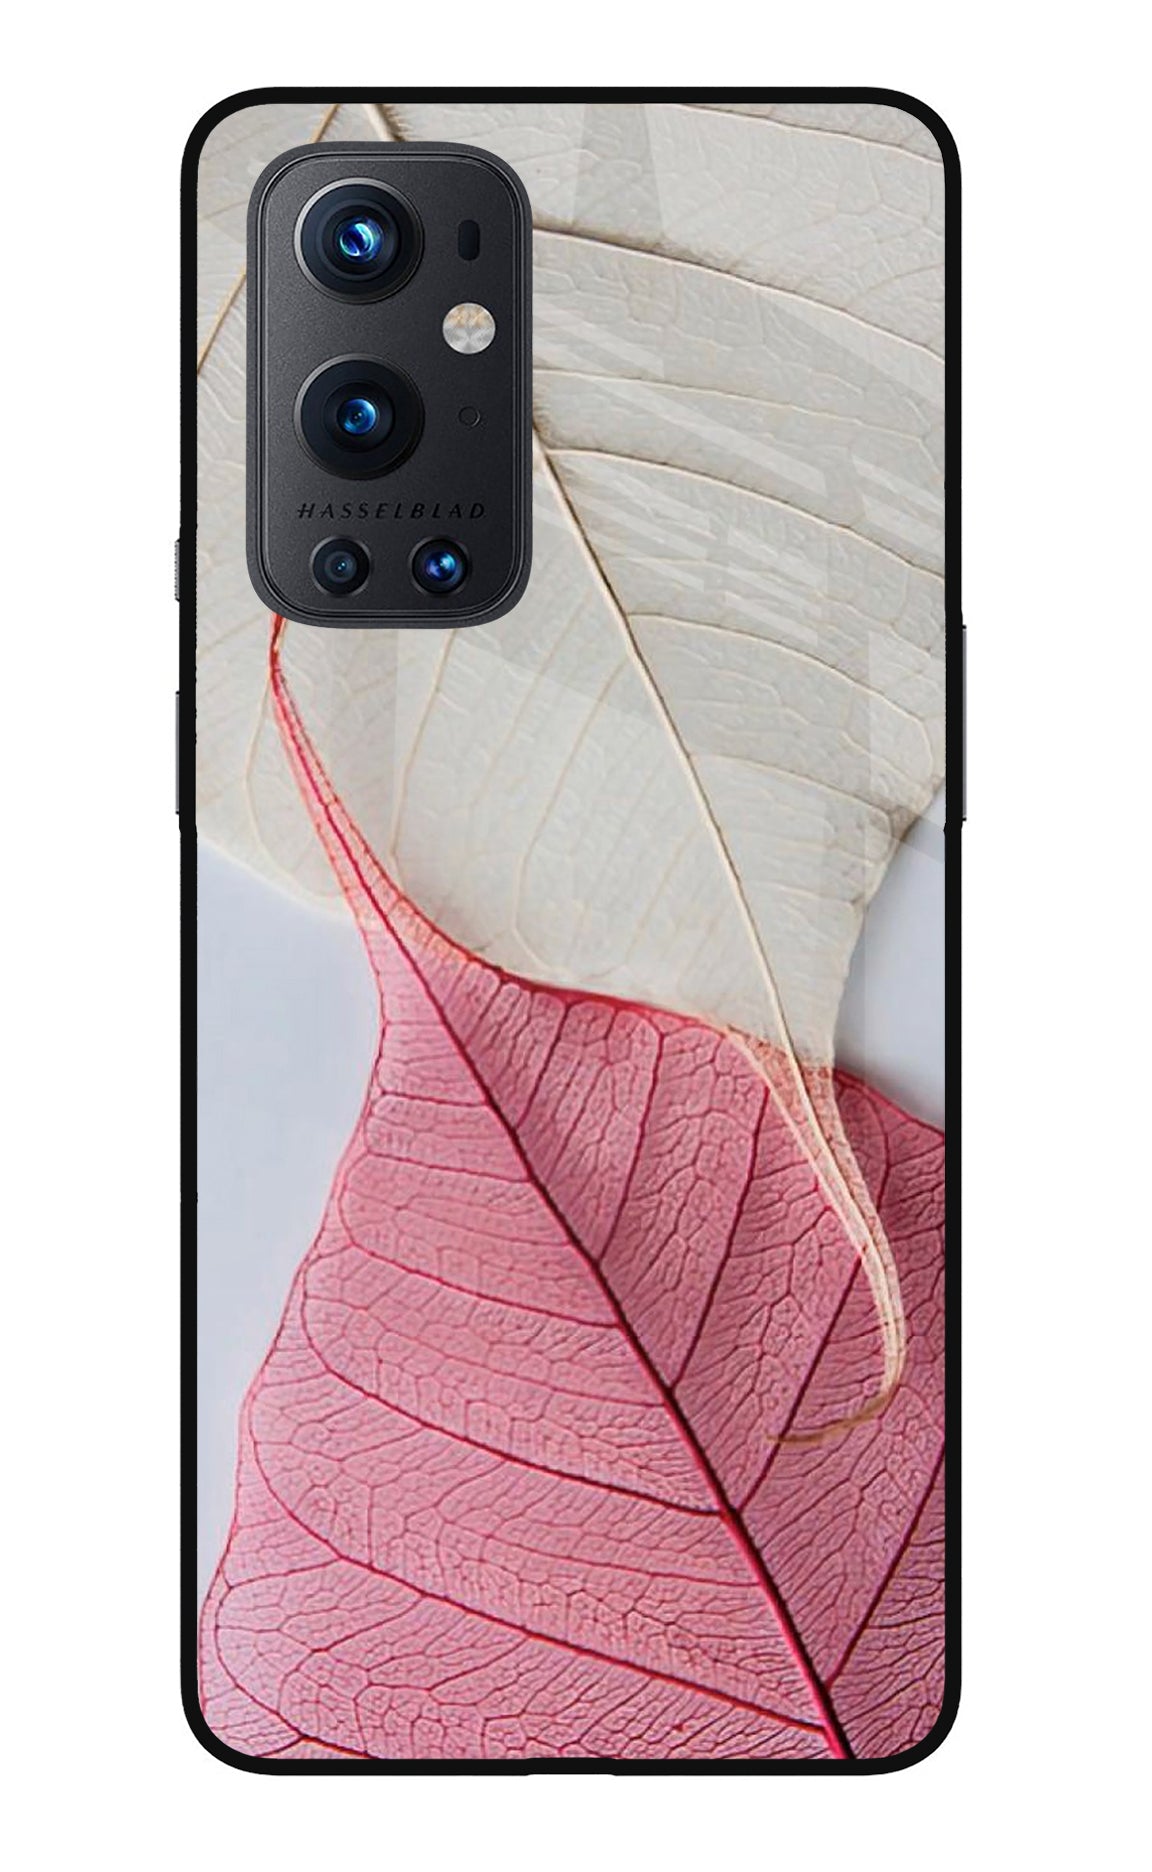 White Pink Leaf Oneplus 9 Pro Back Cover